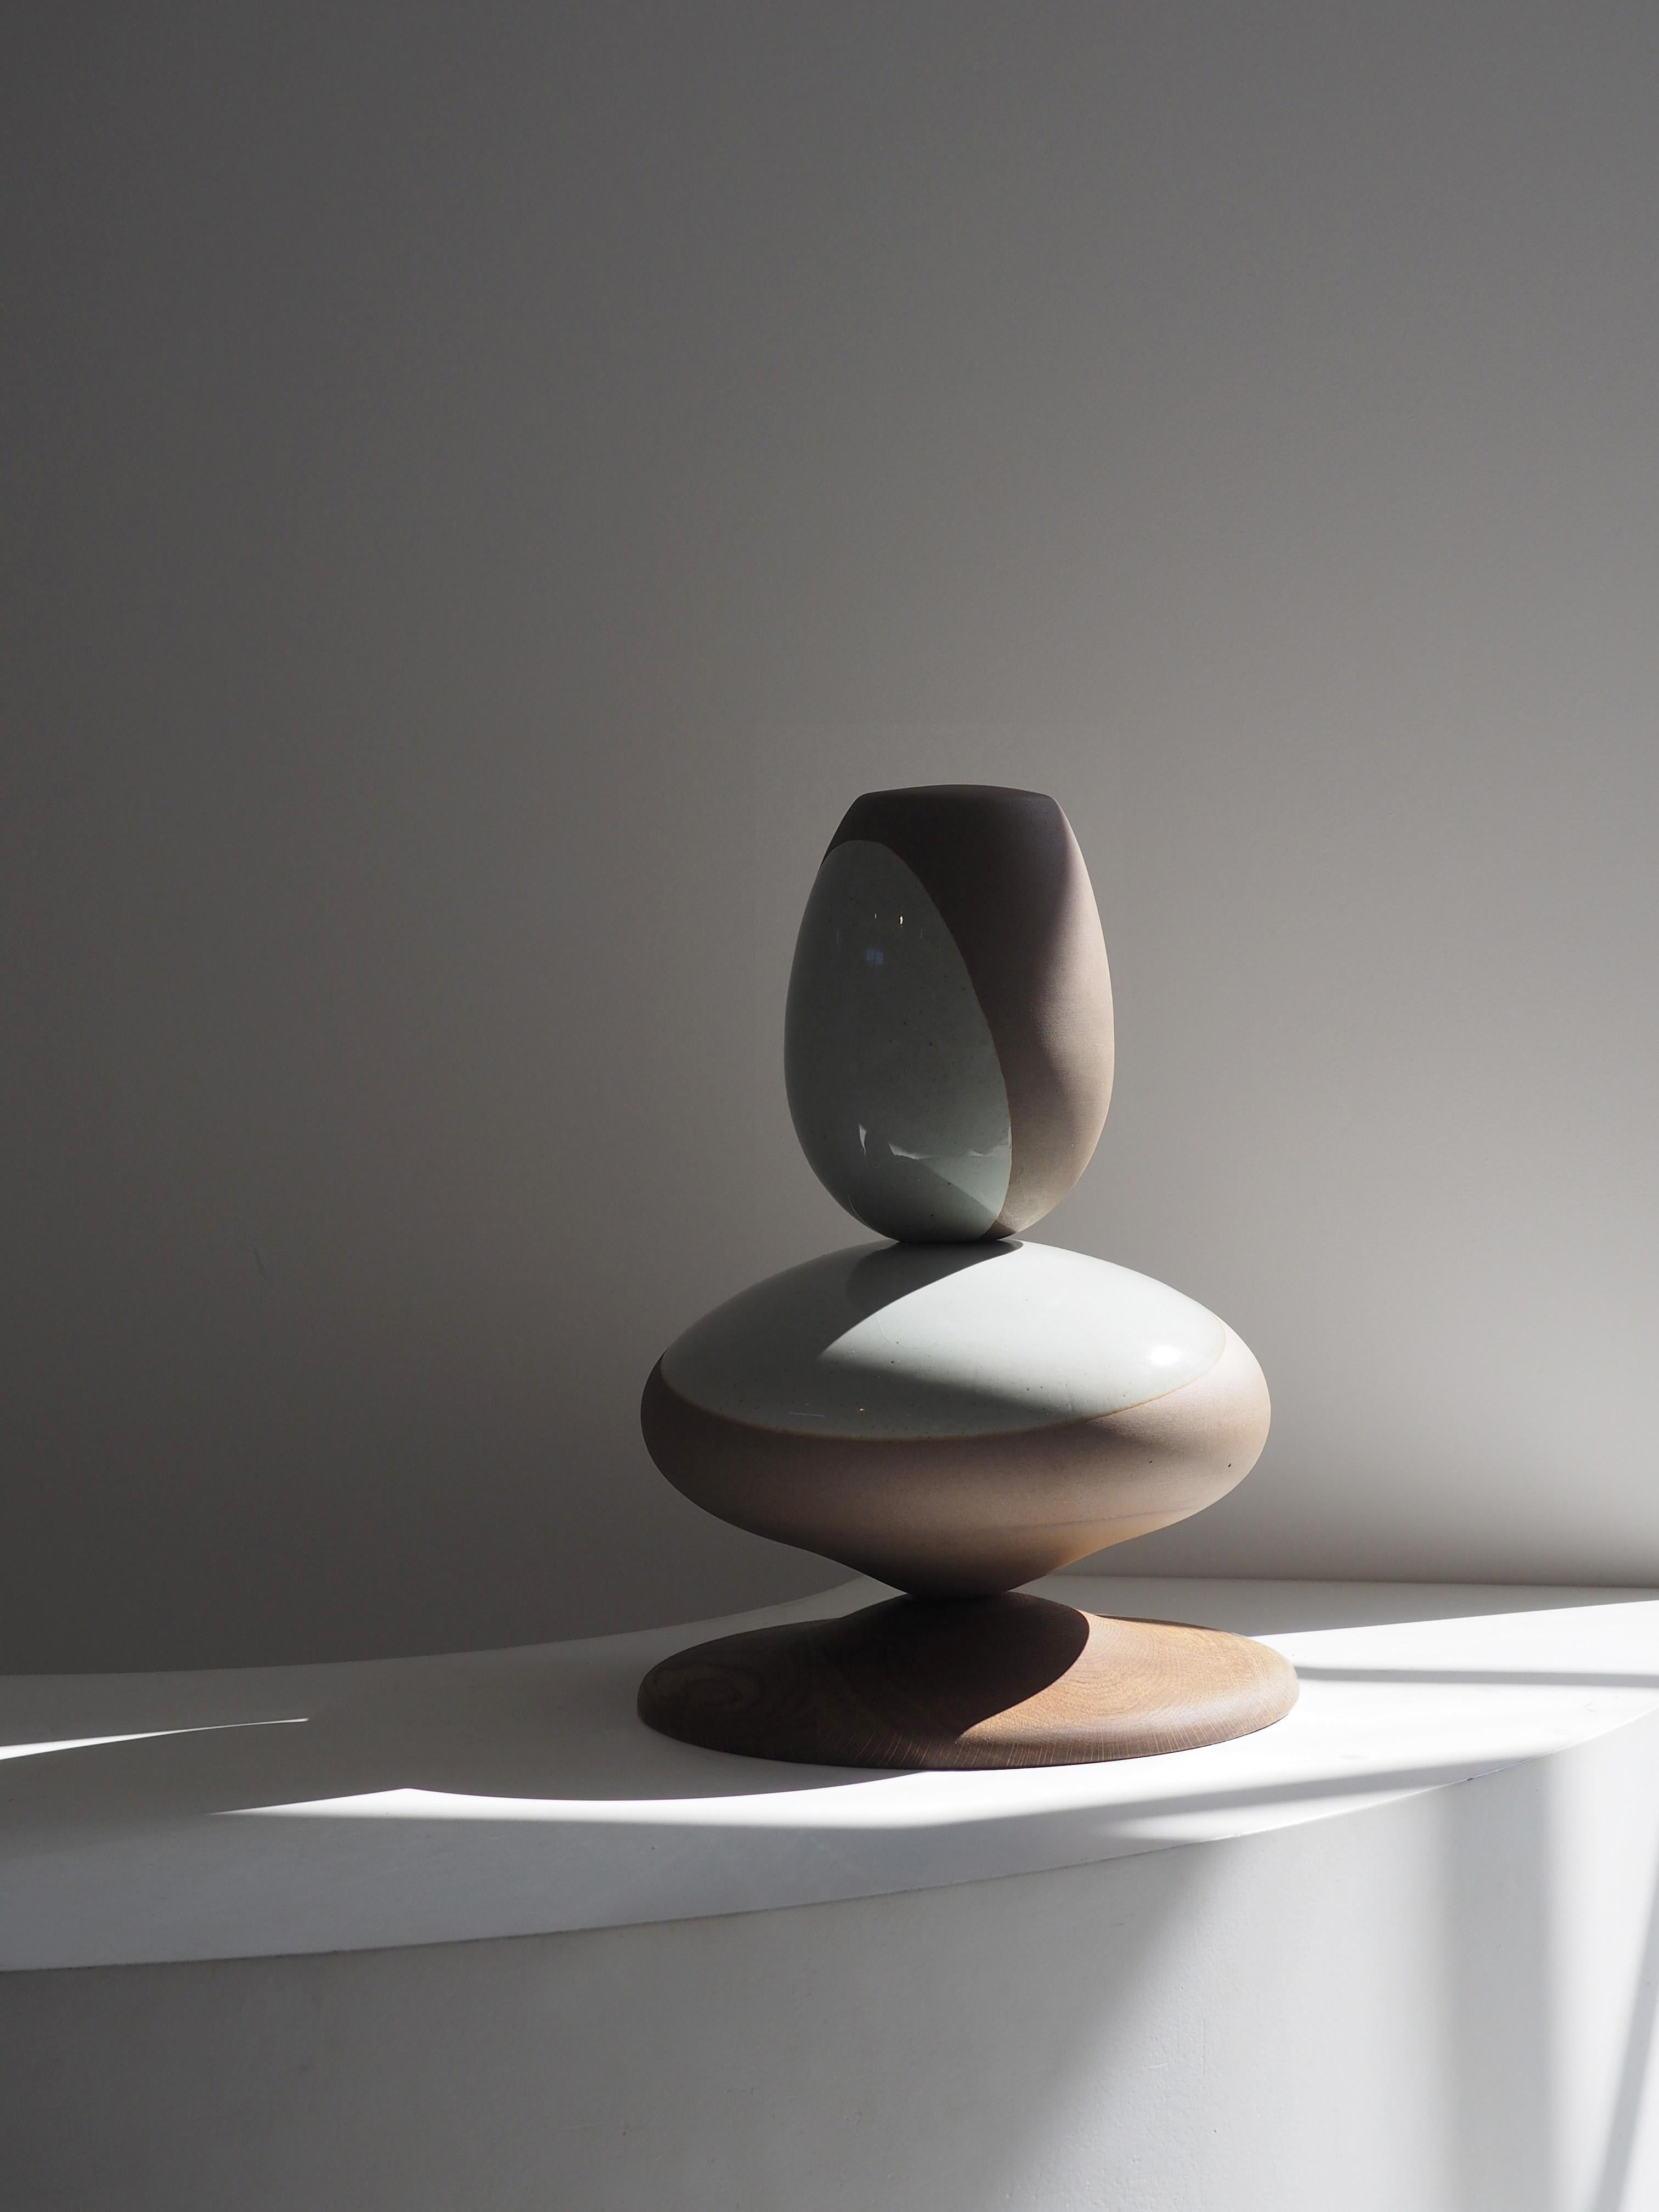 Stack sculpture pair by Soo Joo is a stack sculpture made in Korean Ceramic. It is a timeless form, reminiscent of a pair of perfectly balanced river stones. The stack sculpture series is created with traditional Korean aesthetics in mind, using